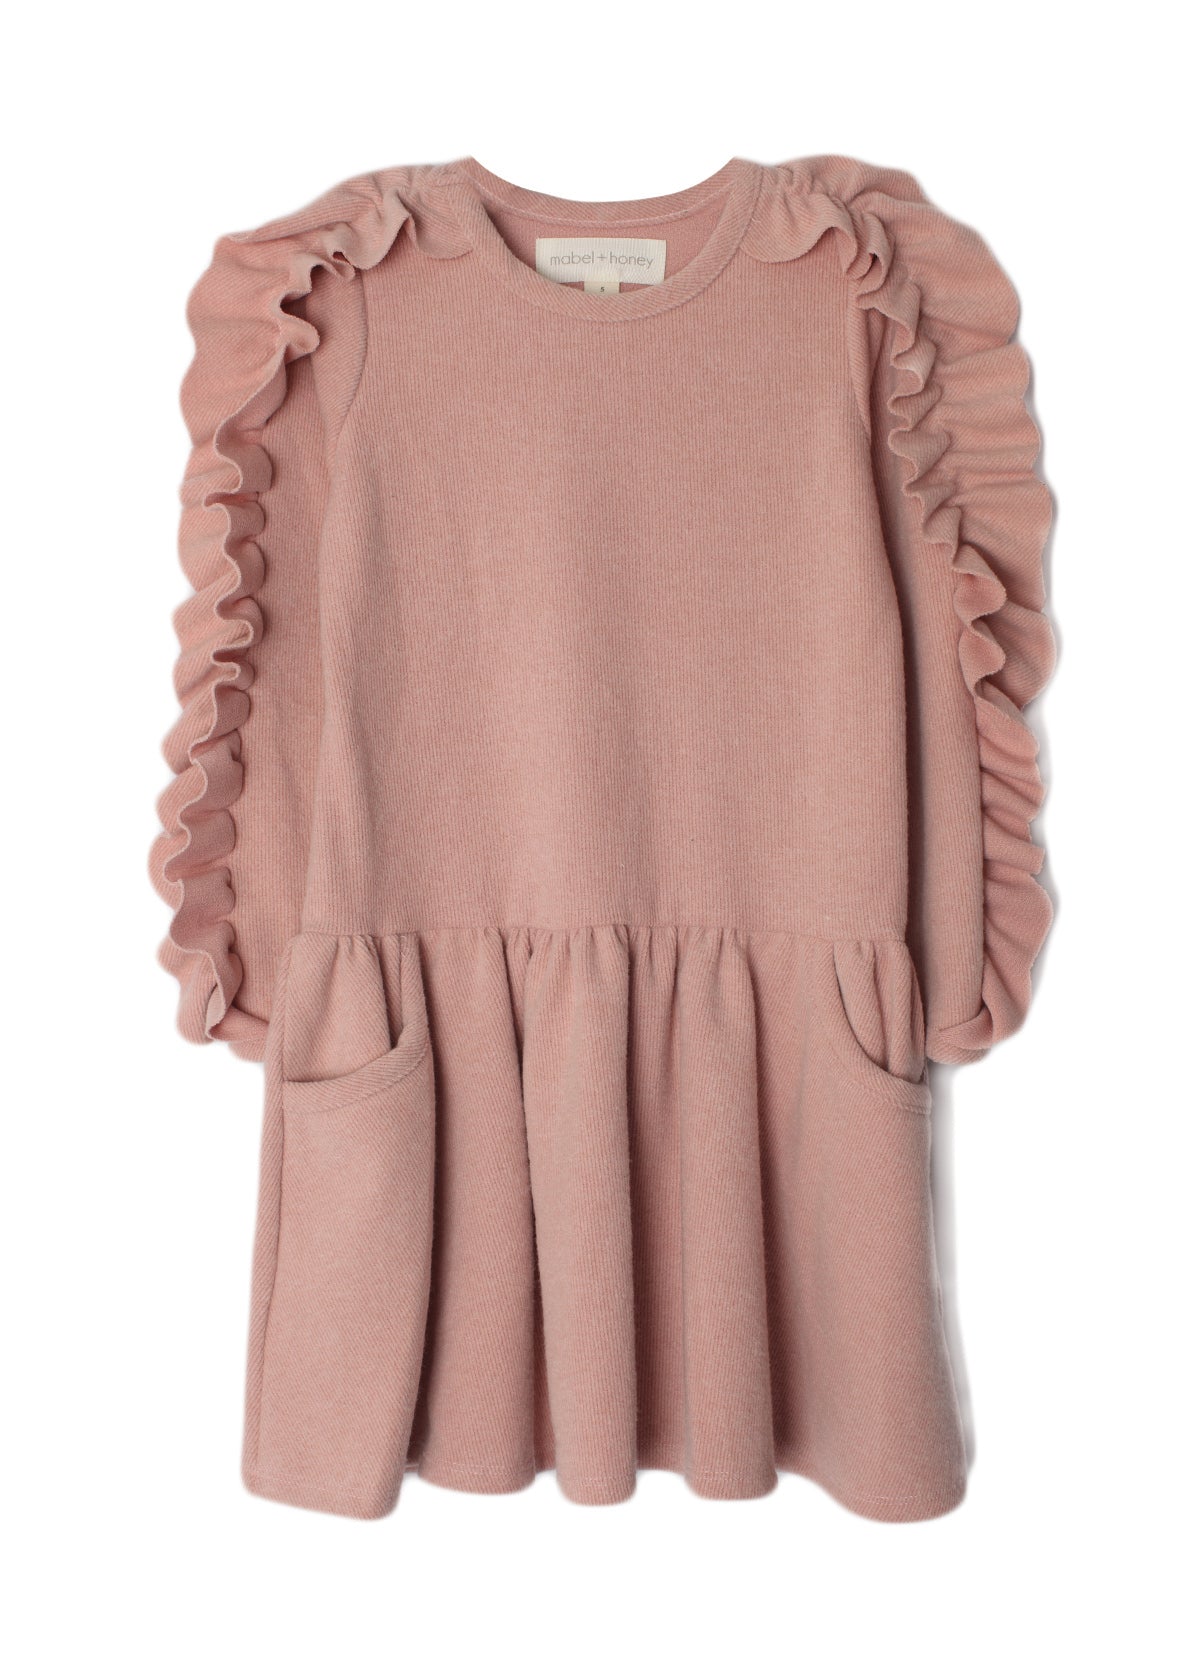 Our blush, tots and tweens ruffle sweater dress. 